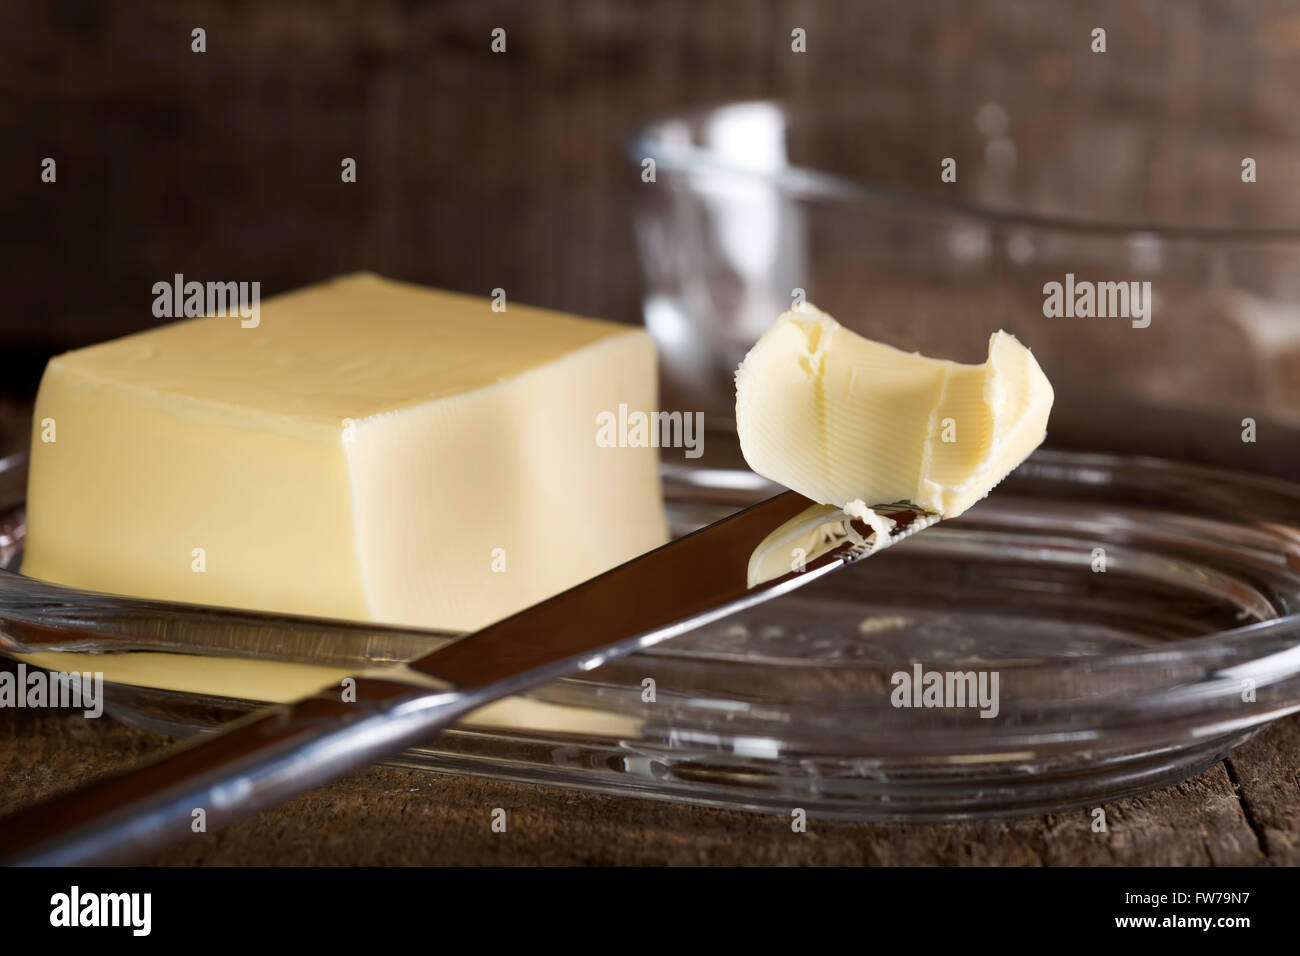 Knife with butter and butter dish in background Stock Photo